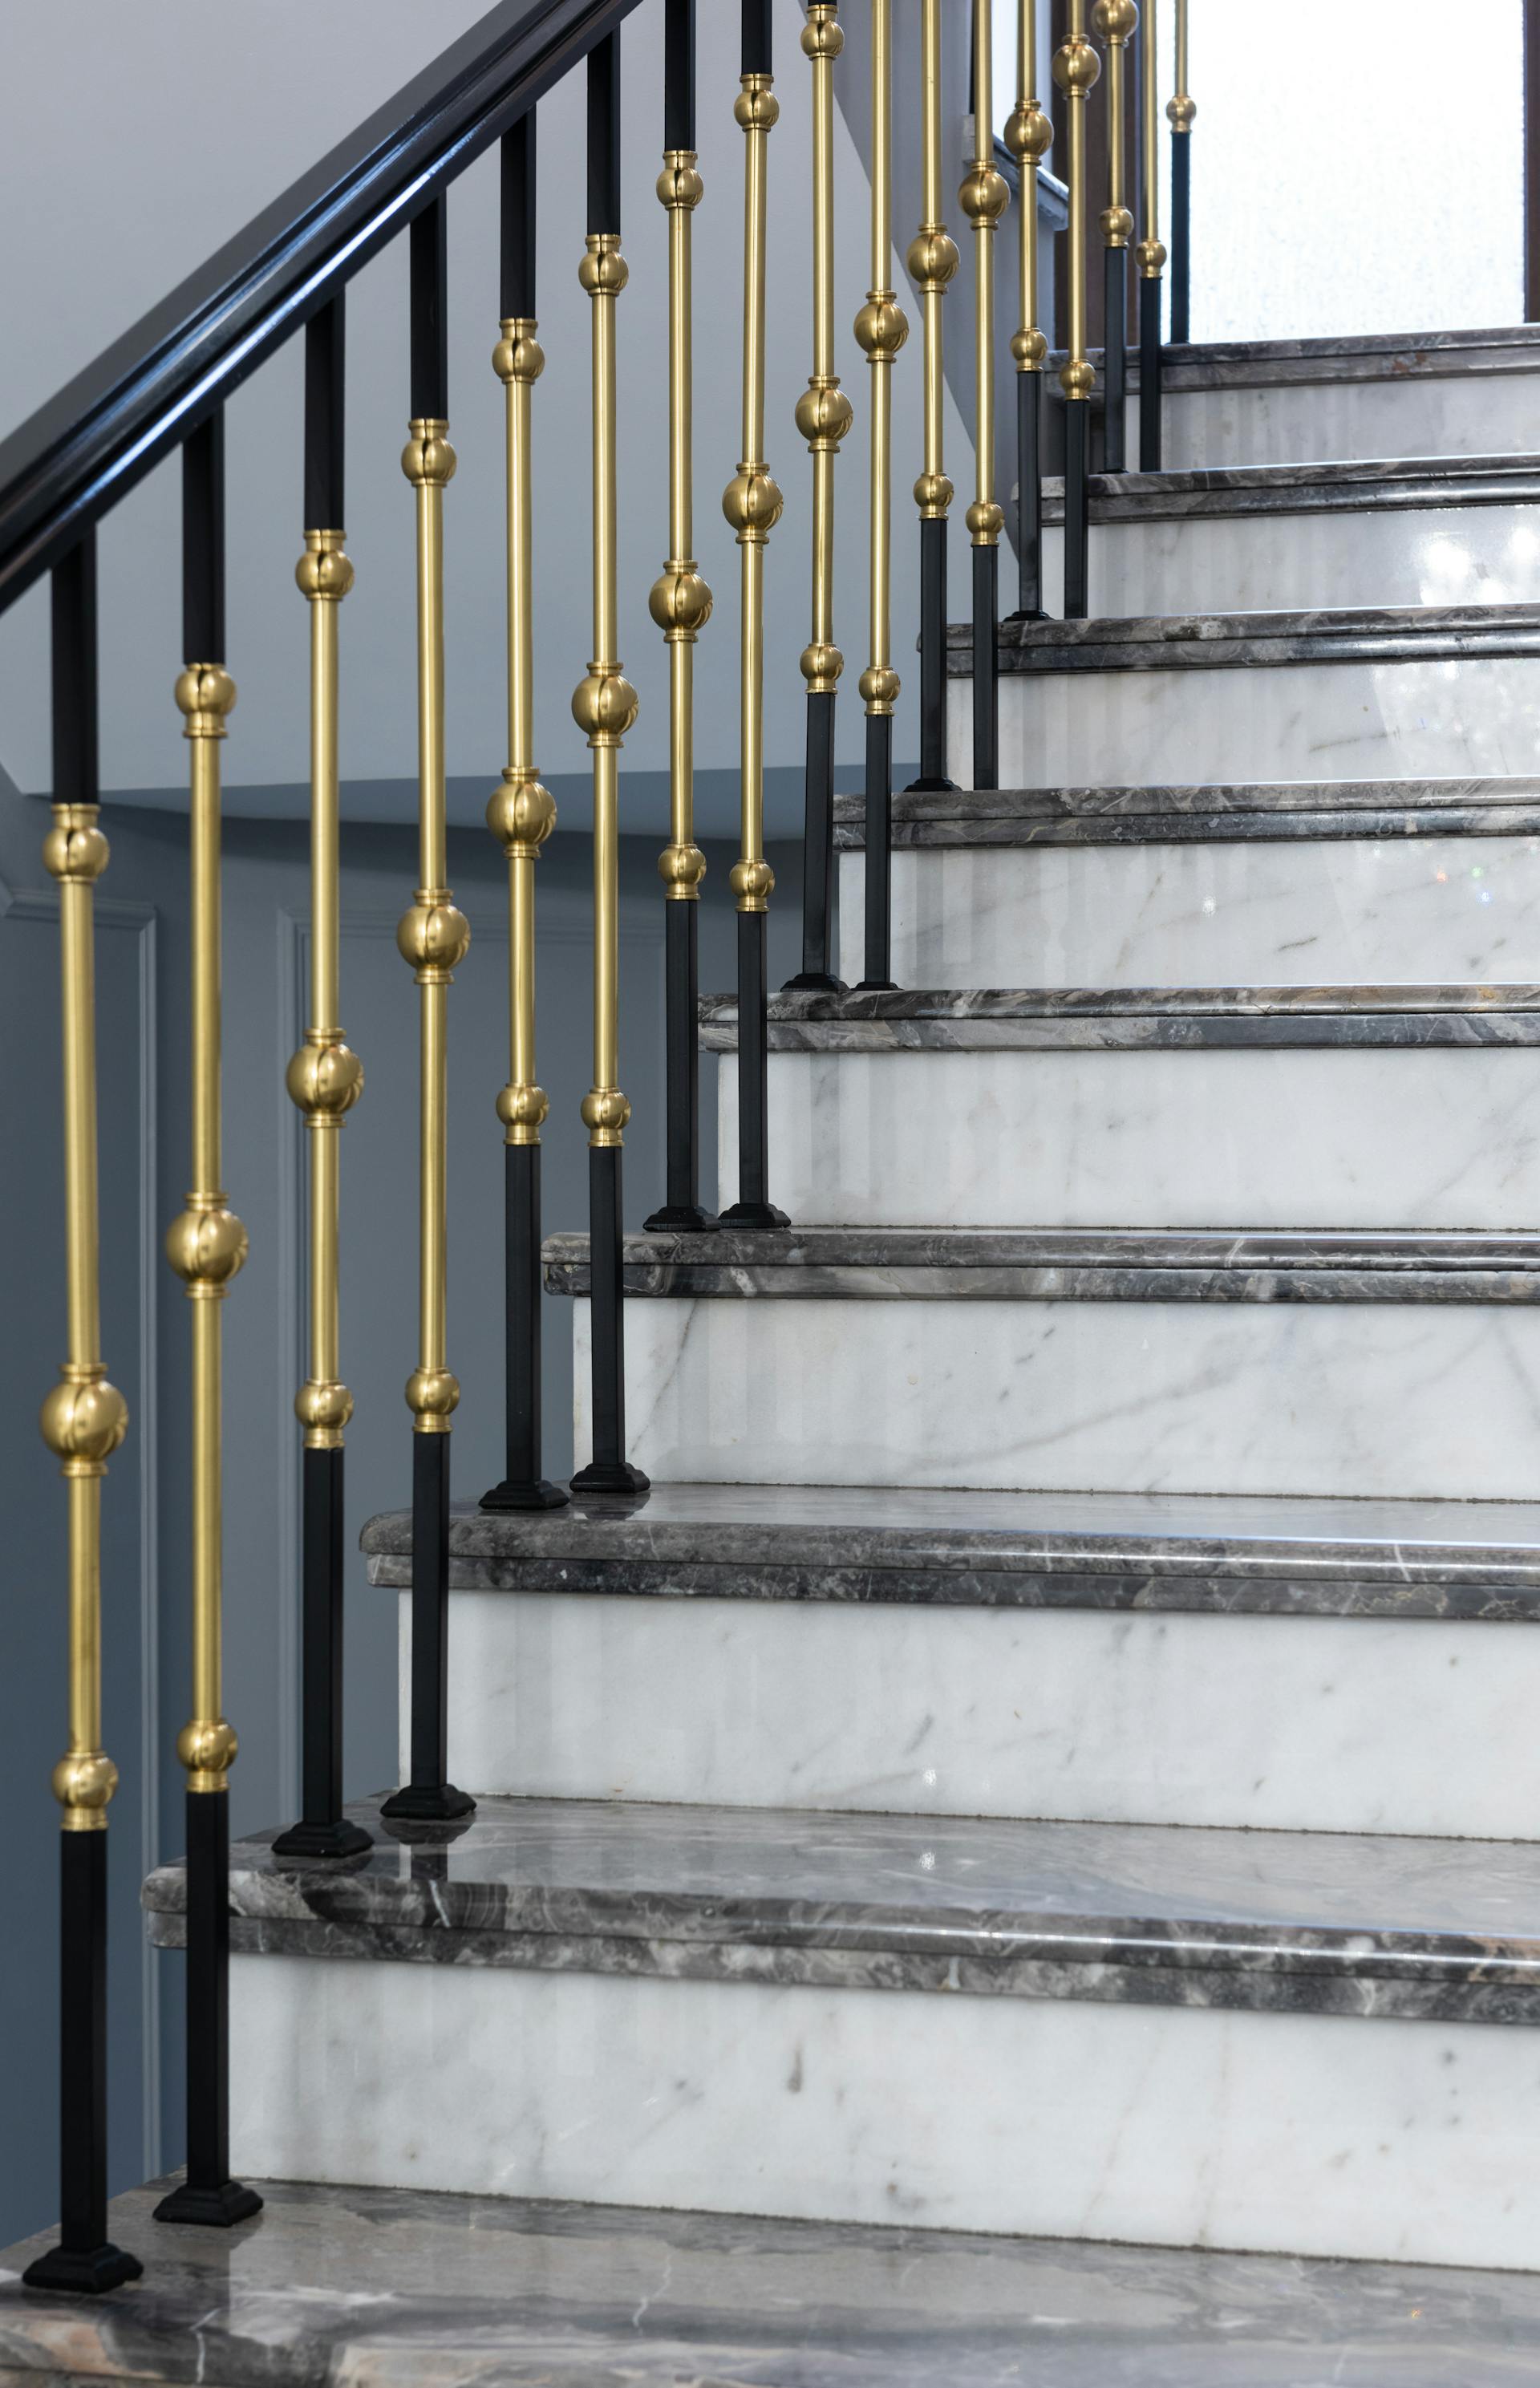 A staircase with a metal banister | Source: Pexels